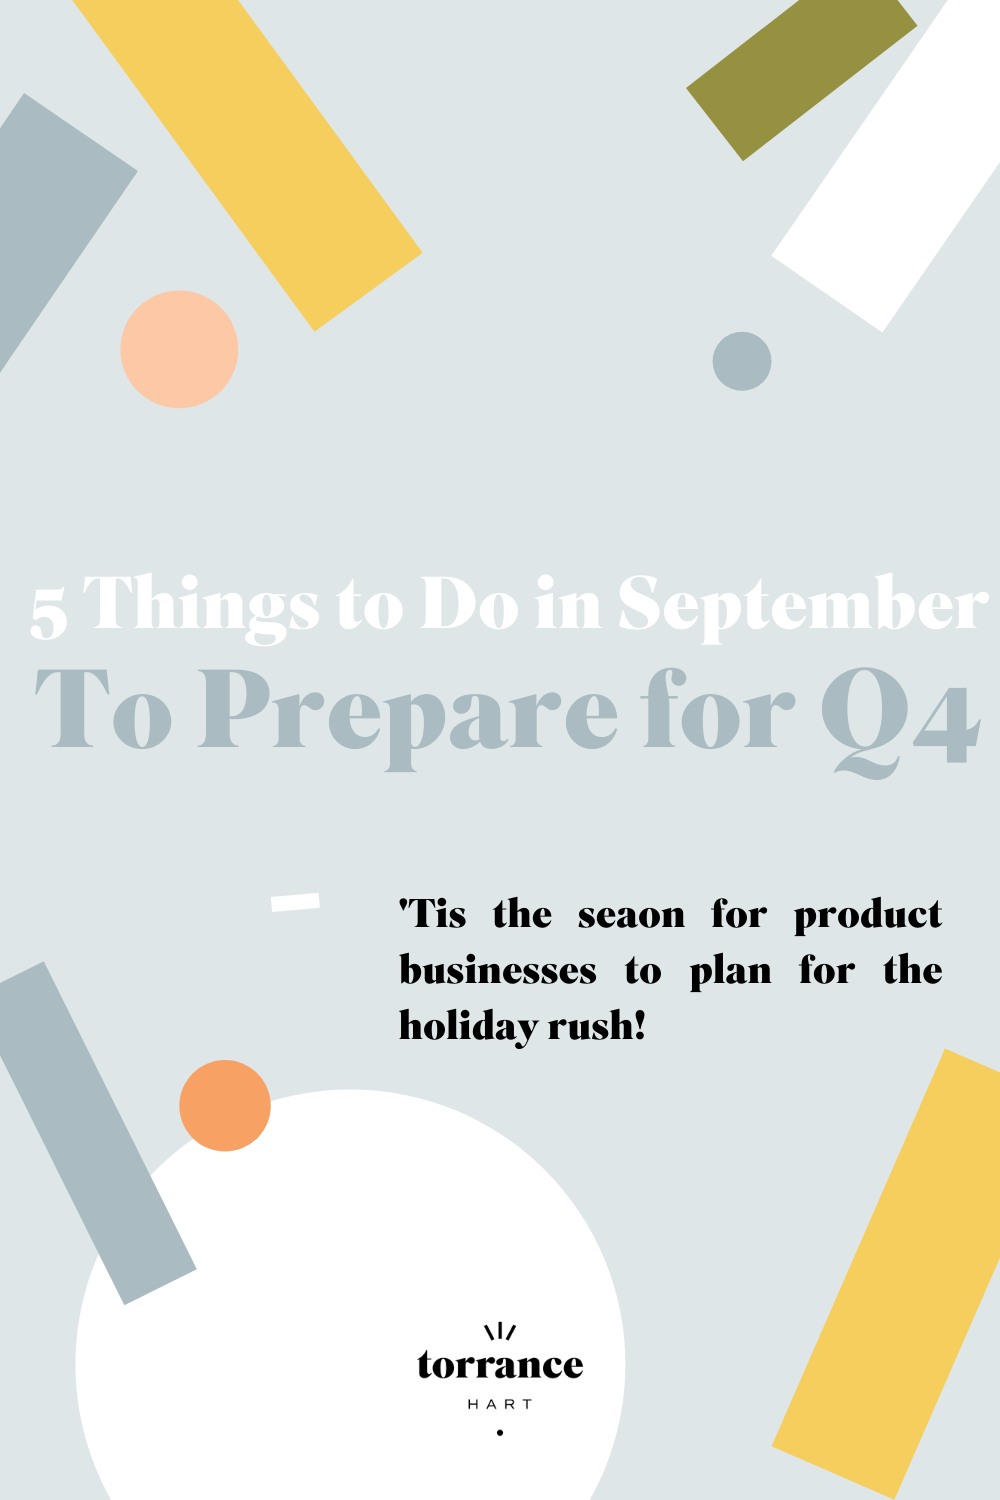 5 Things to do in September to prepare for Q4